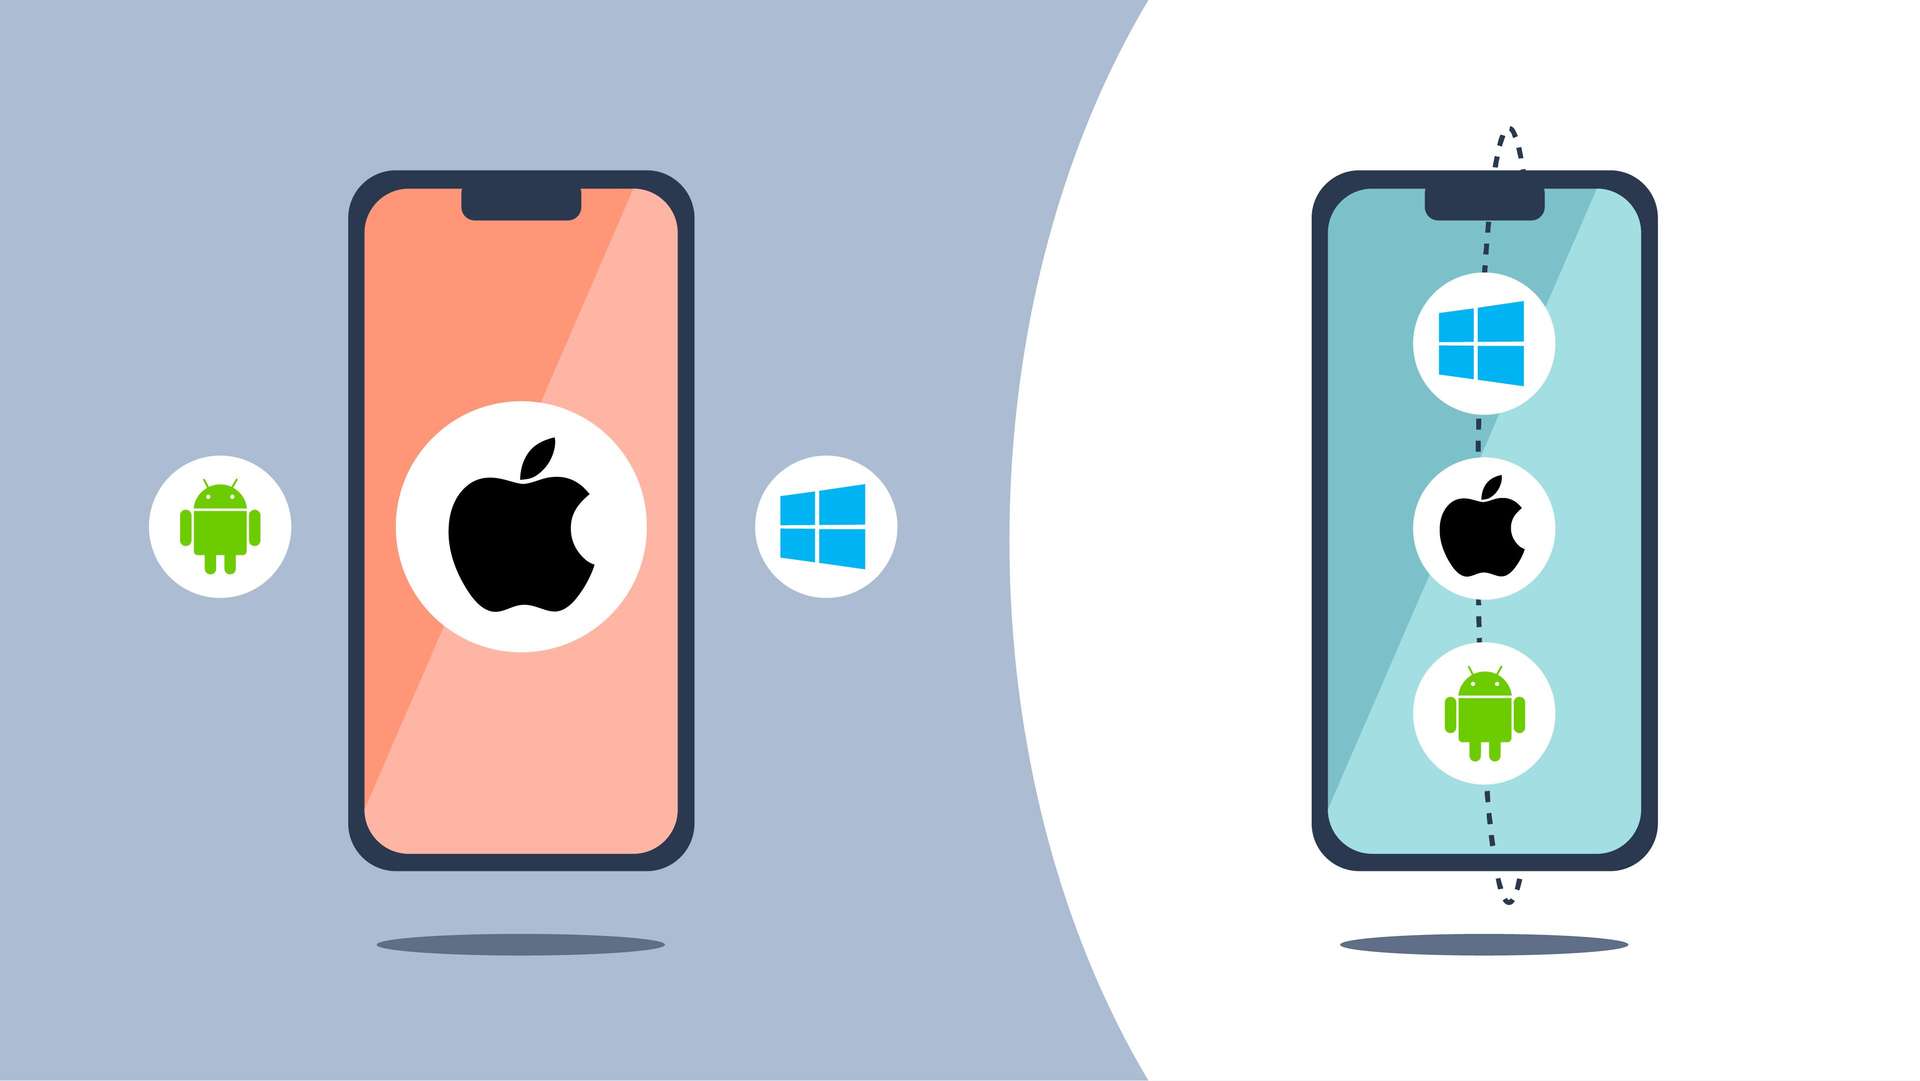 Native Apps on a a phones app store vs react native apps working for all platforms on a mobile phone